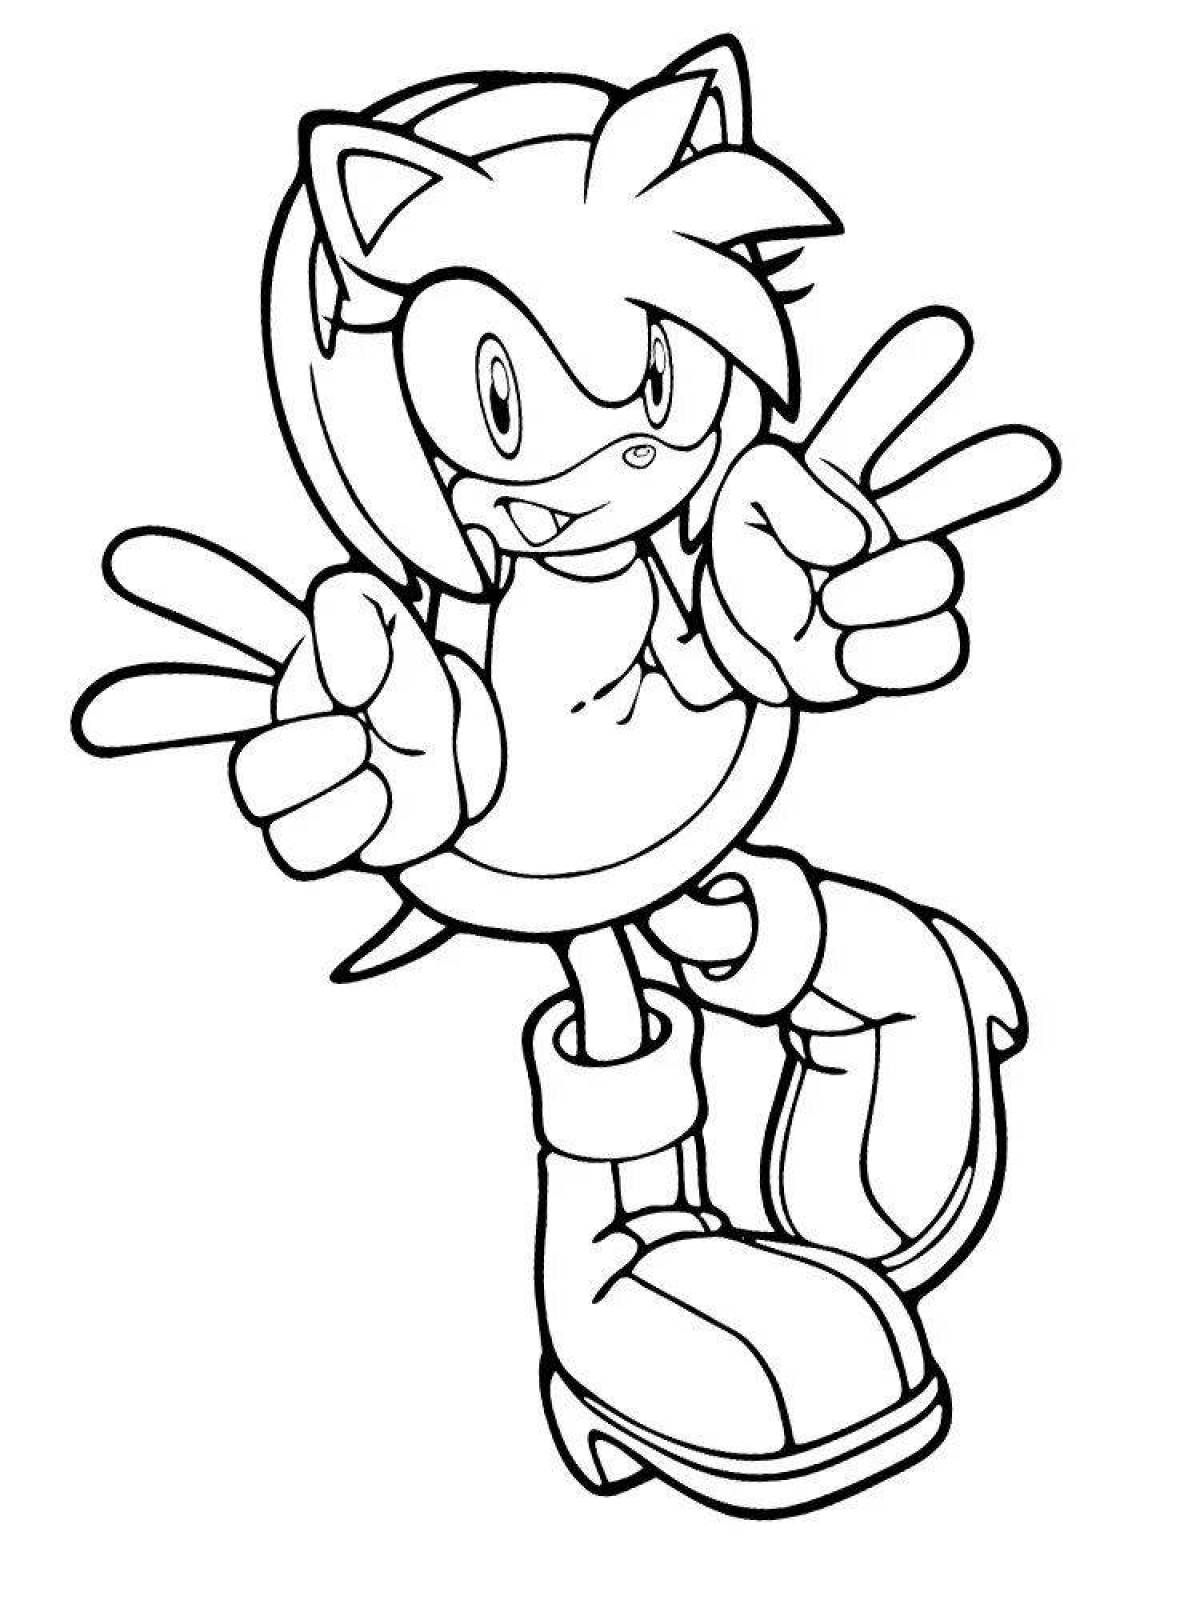 Fairytale coloring pages sonic heroes